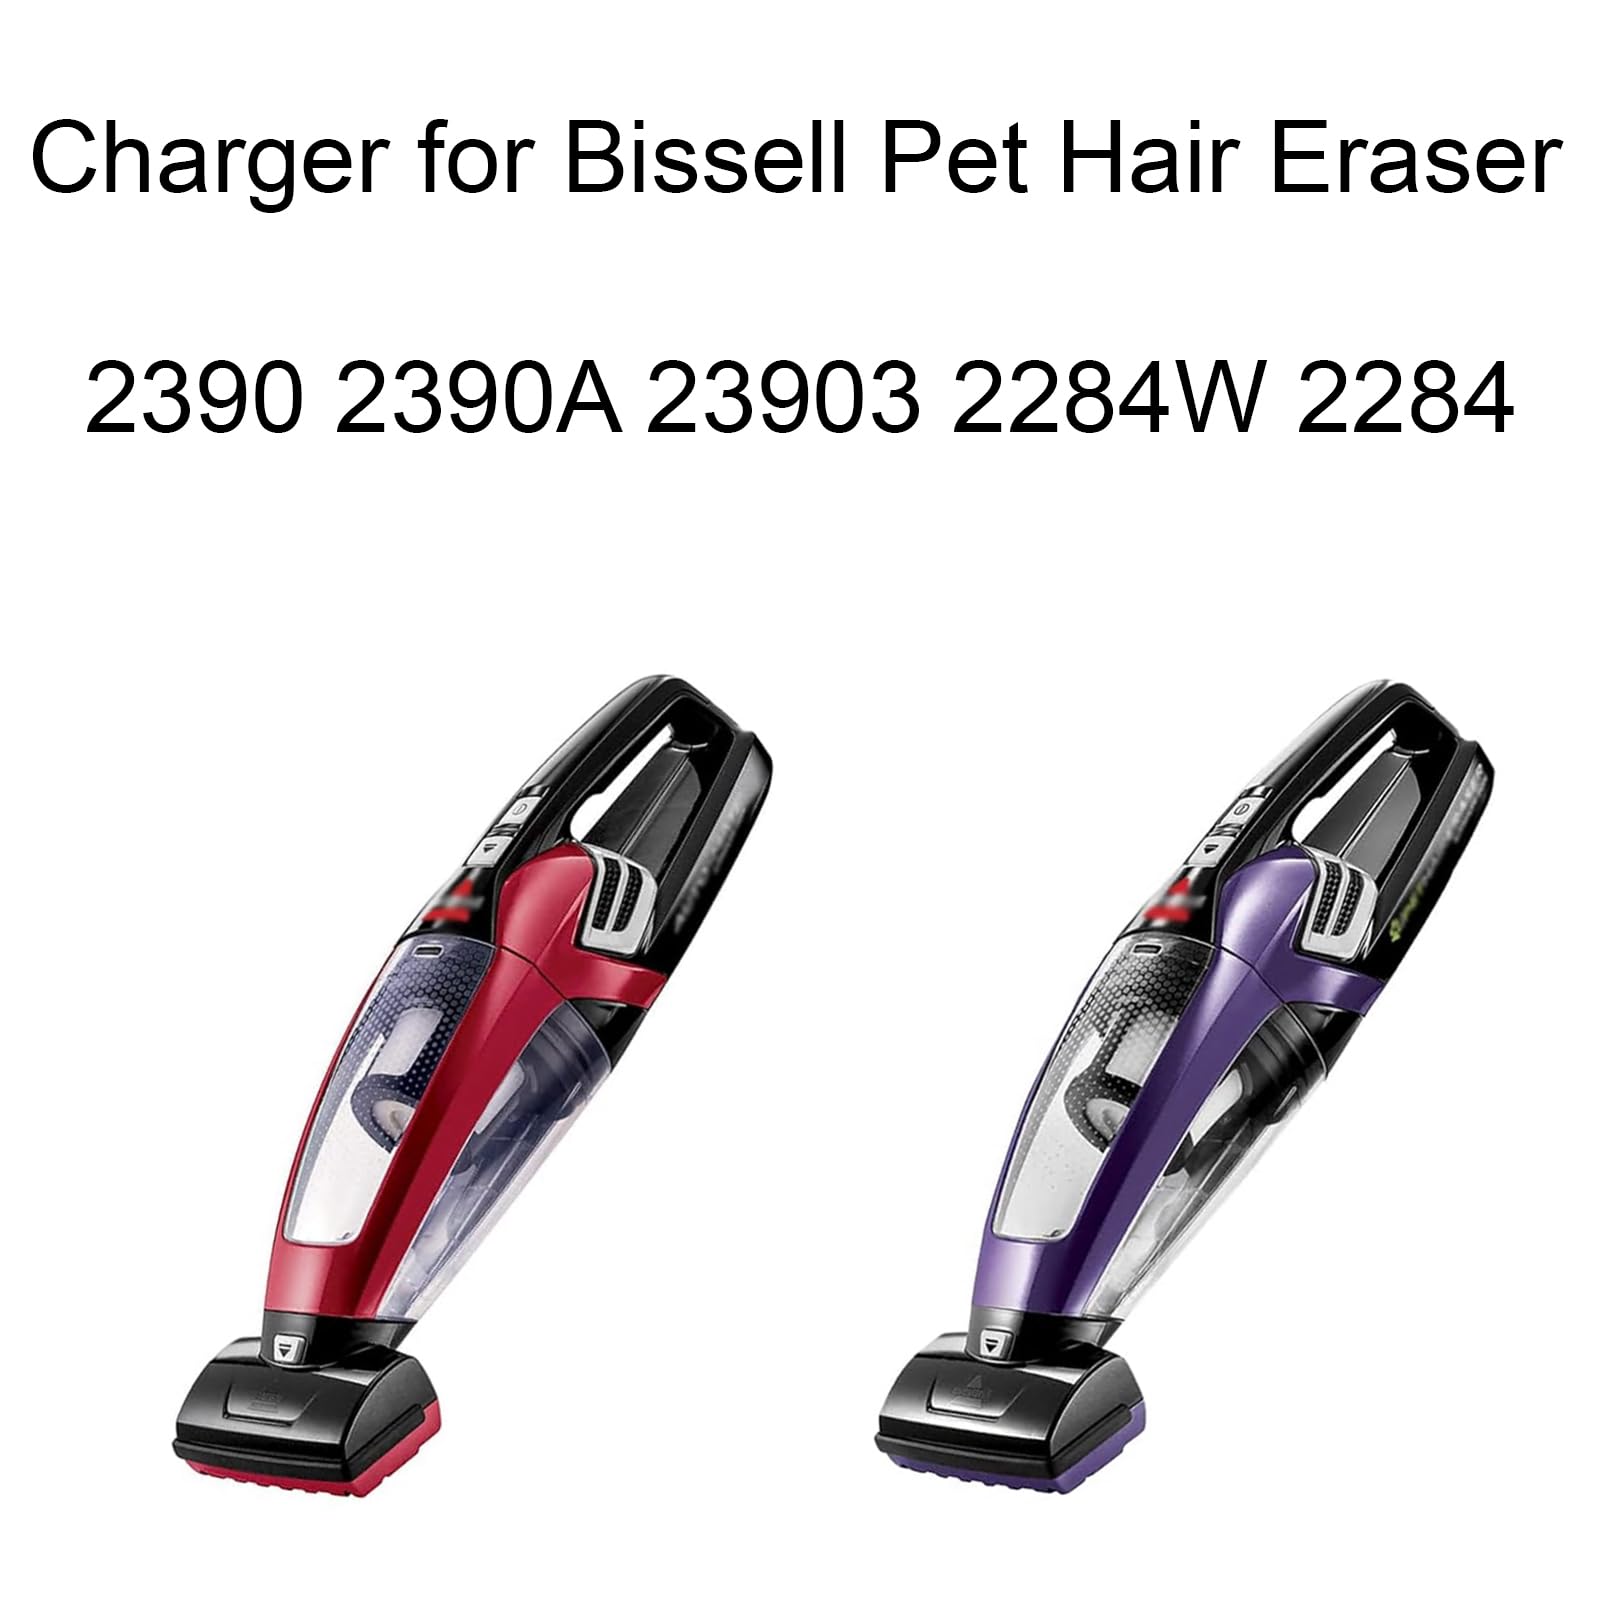 Charger for Bissell Pet Hair Eraser 2390 2390A 23903 2284W 2284 Bissell Charger Compatible Bissell Pet Hair Vacuum 14.4V Lithium Ion Cordless Hand Vacuum 1614206 ZD5F230030US Power Adapter